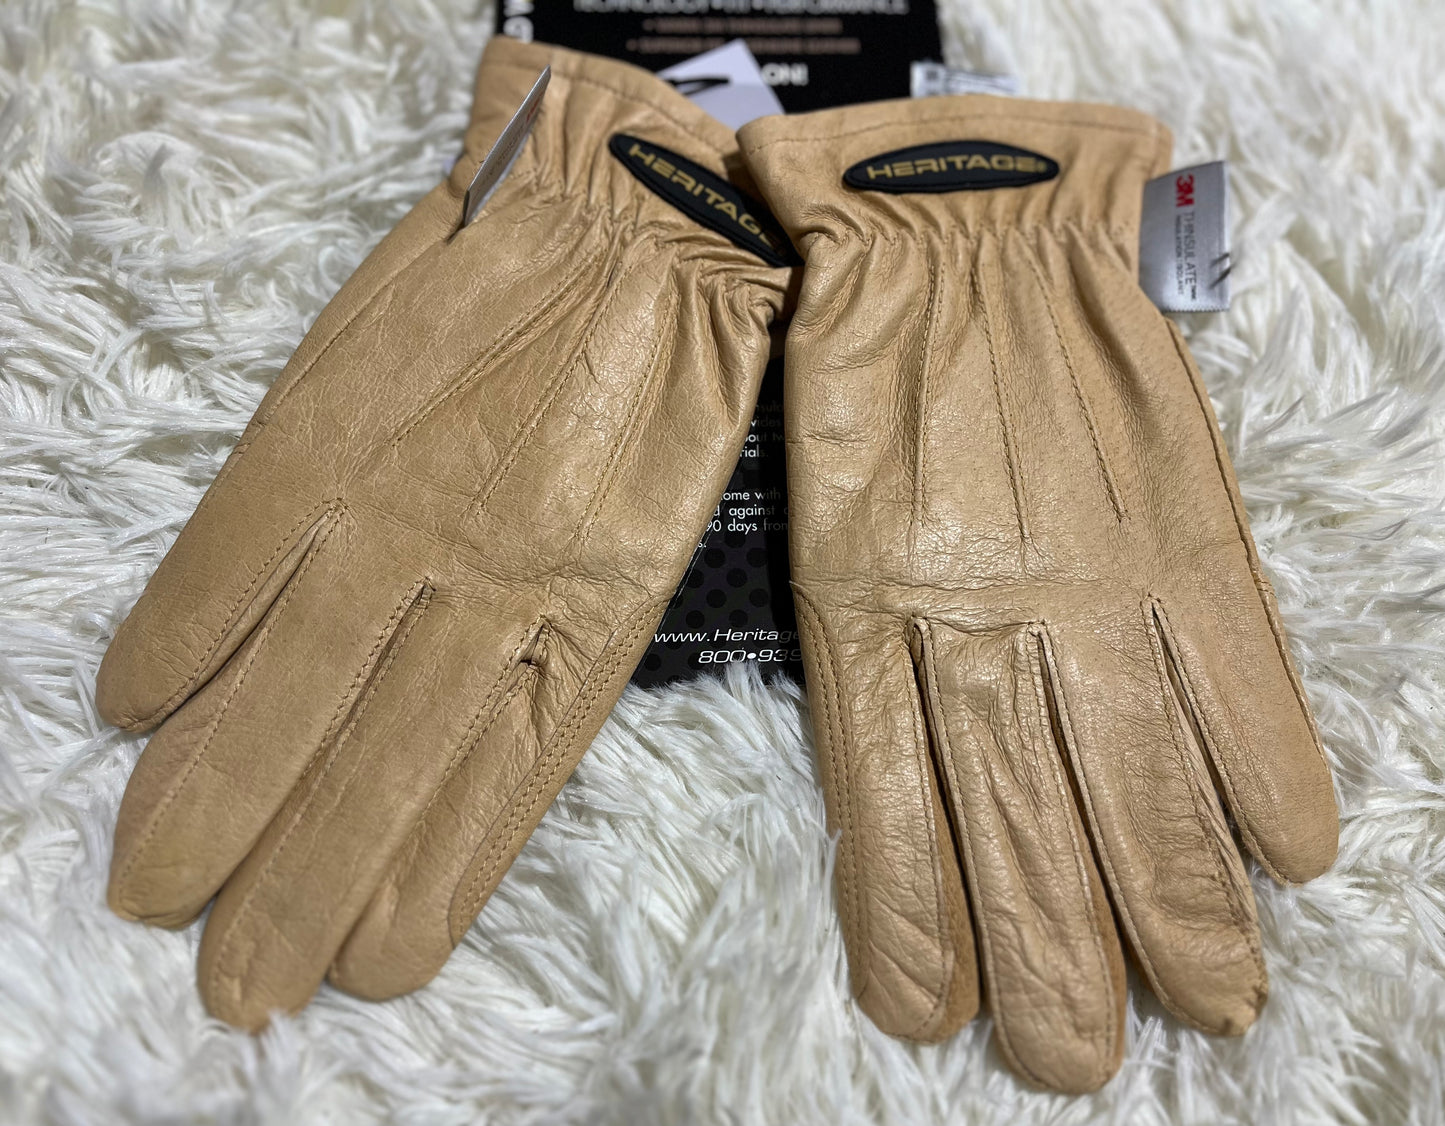 Adult heritage cold weather leather glove